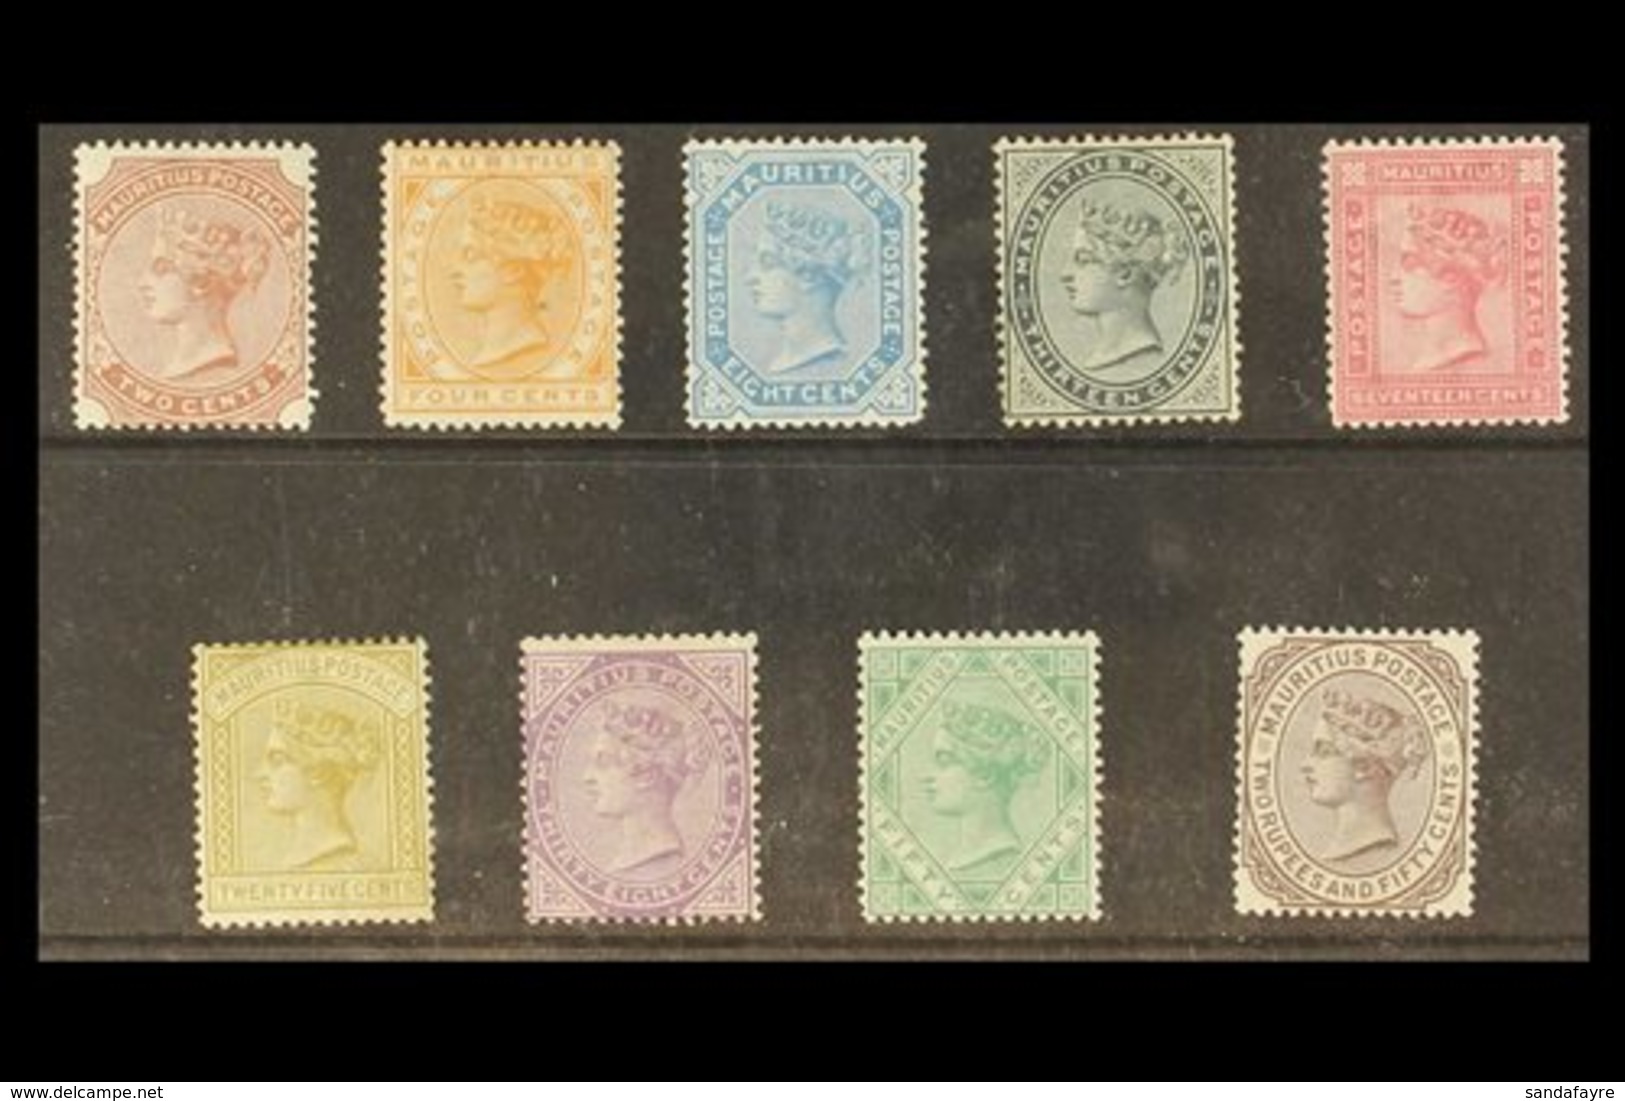 1879 2c To 2r 50 Queen Victoria Set Complete, Wmk Crown CC, SG 92/100, Very Fine And Fresh Mint. Scarce And Lovely Set.  - Maurice (...-1967)